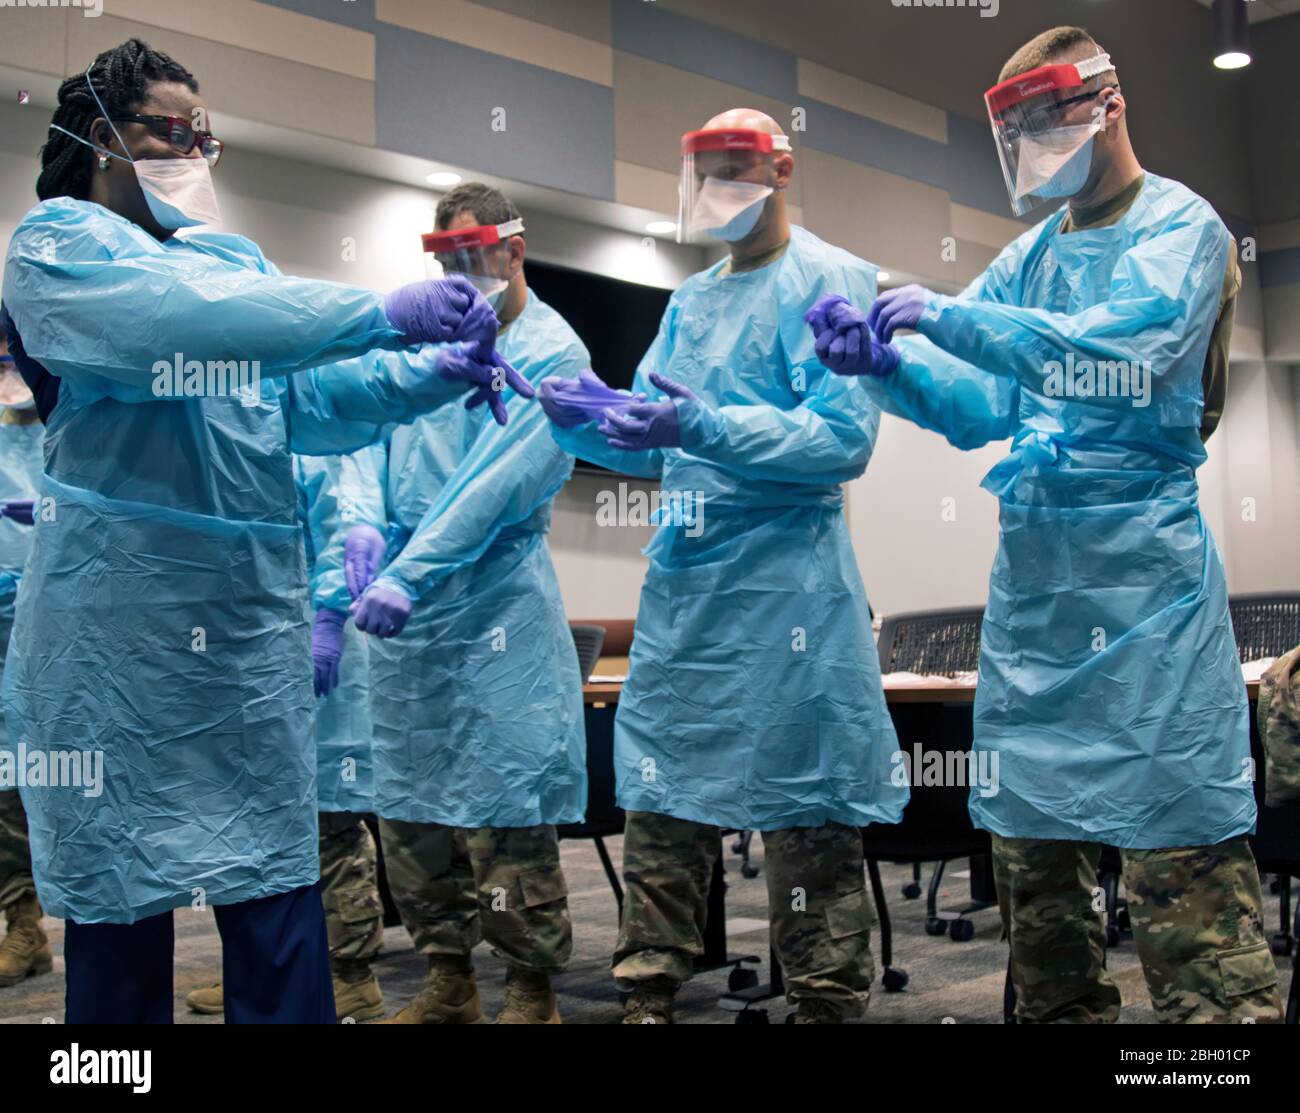 Members of the Florida National Guard (FLNG) gather with local hospital staff to collaborate on donning and doffing personal protective equipment (PPE) during Task Force – Medicals’ response to the COVID-19 virus, March 17, 2020. The FLNG is mobilizing up to 500 Citizen-Soldiers and Airmen in support of the Florida Department of Health response in Broward County. (U.S. Army photo by Sgt. Leia Tascarini) Stock Photo